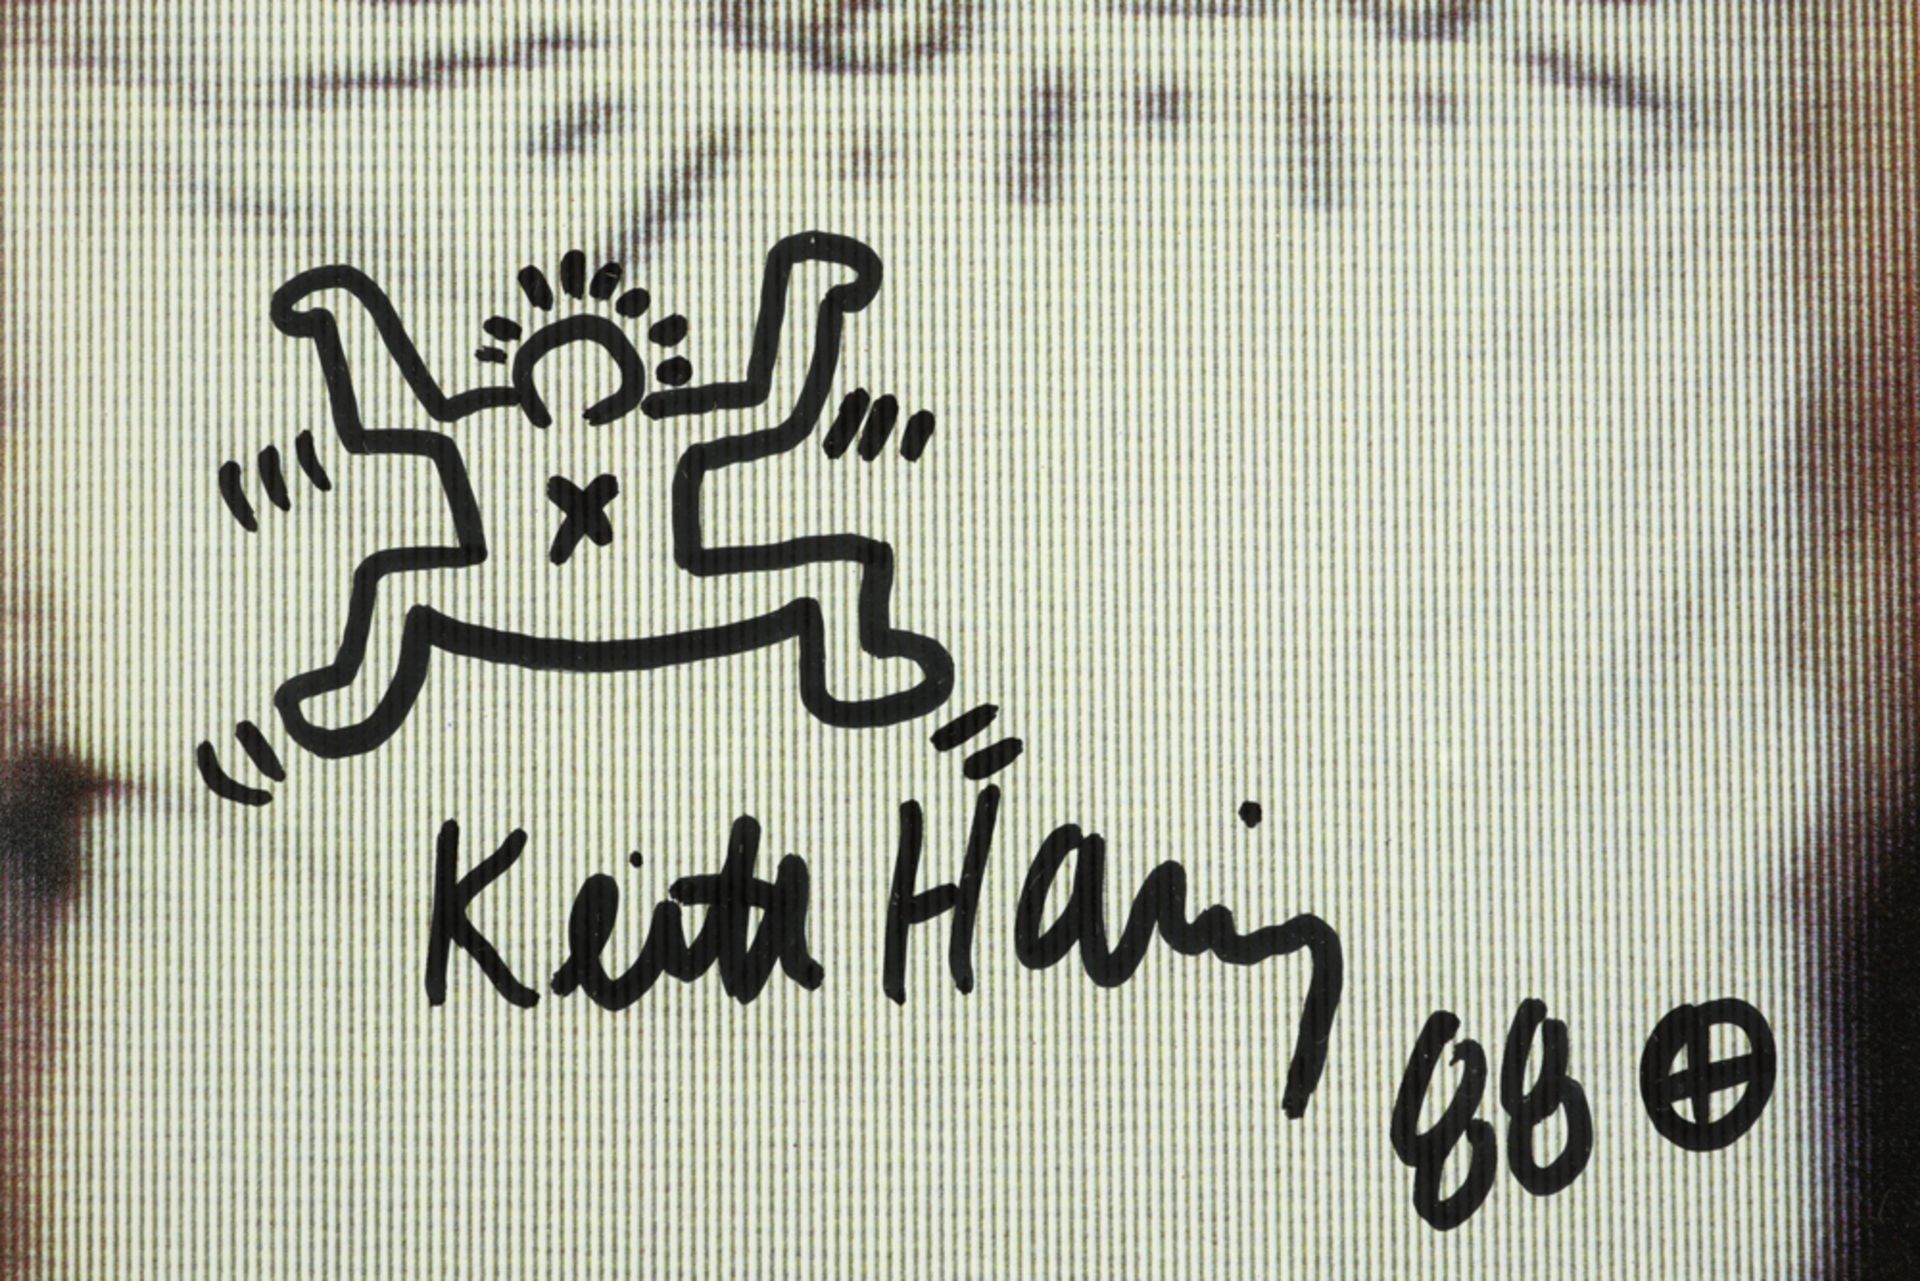 small Keith Haring drawing on a copy of the book "Art in transit : subway drawings" - signed and - Image 2 of 3